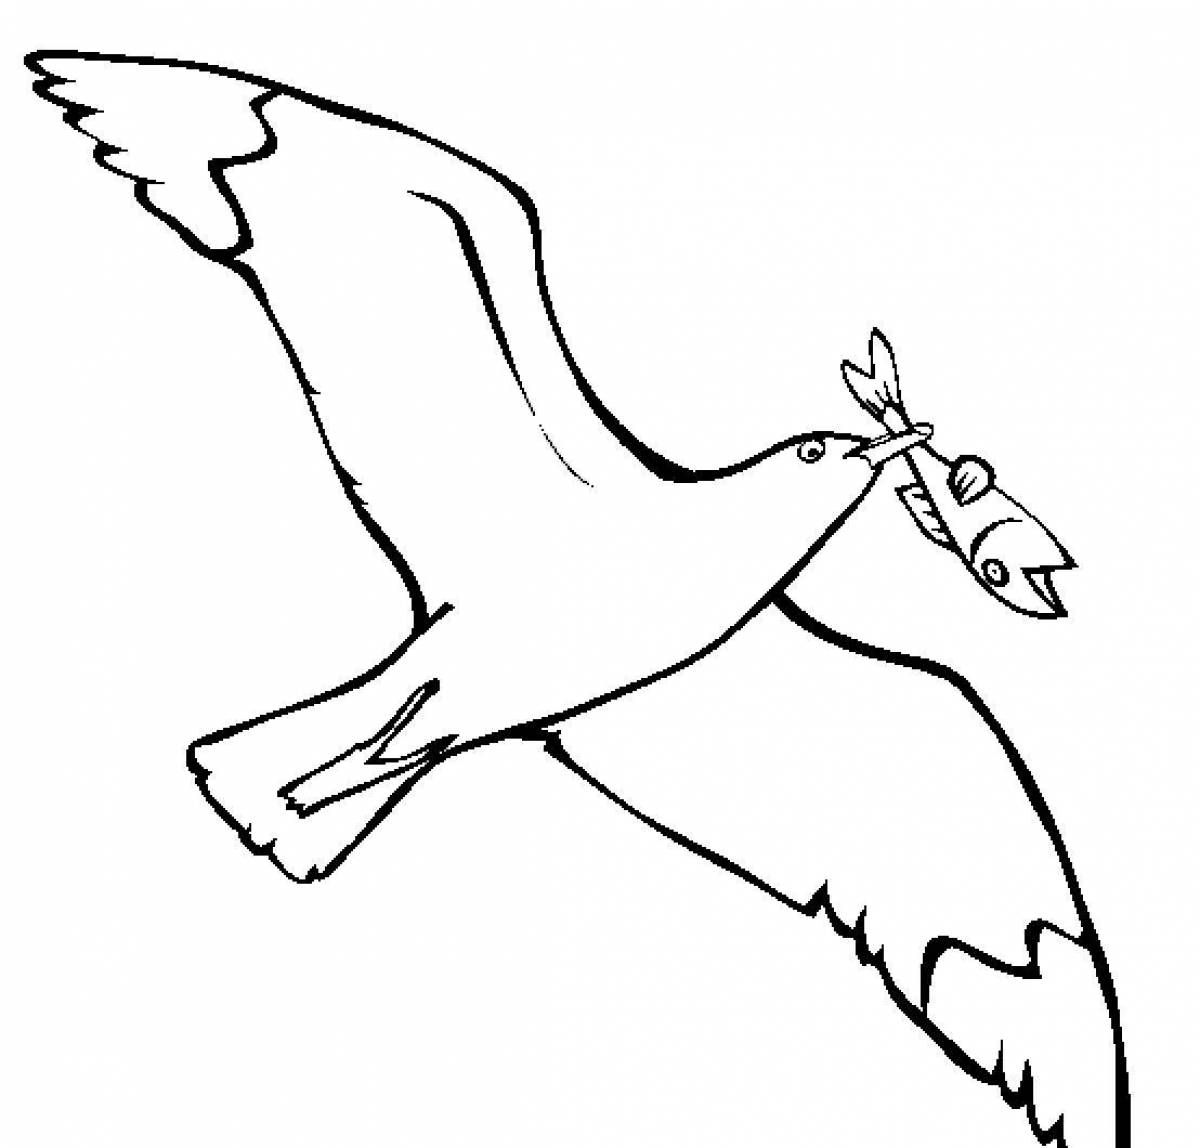 Coloring pages with seagulls for children